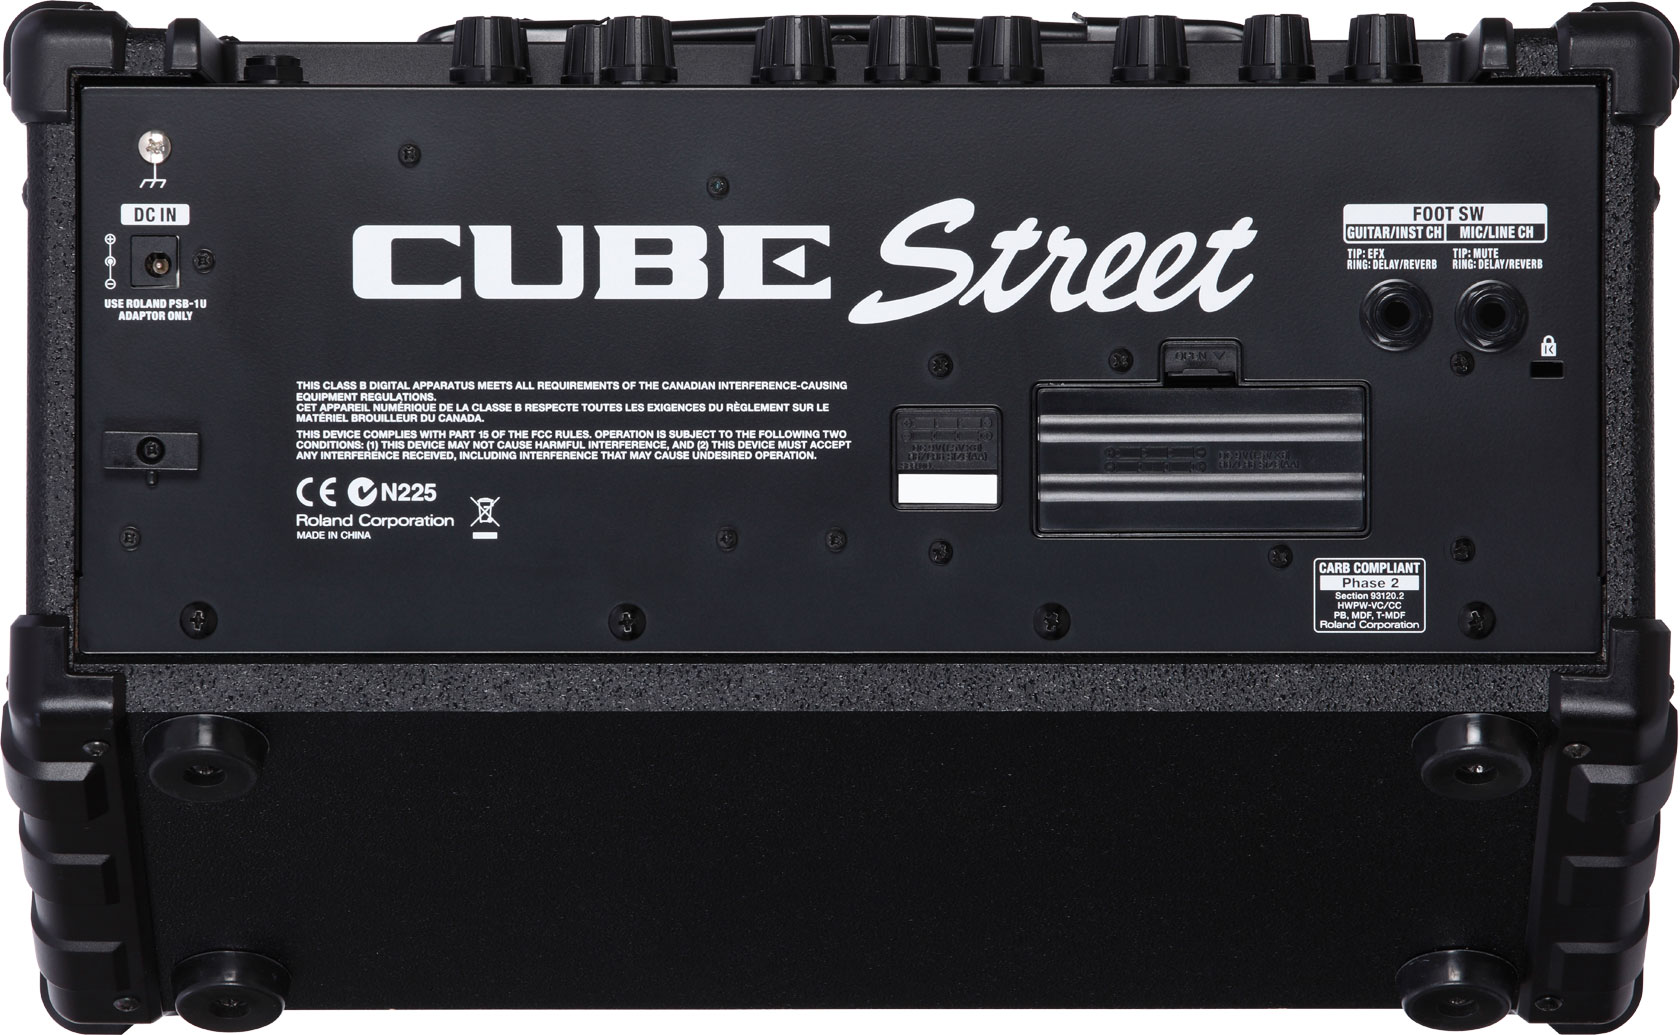 Roland Cube Street Battery Stereo Amplifier 2x25w 2x8 Black - Electric guitar combo amp - Variation 2